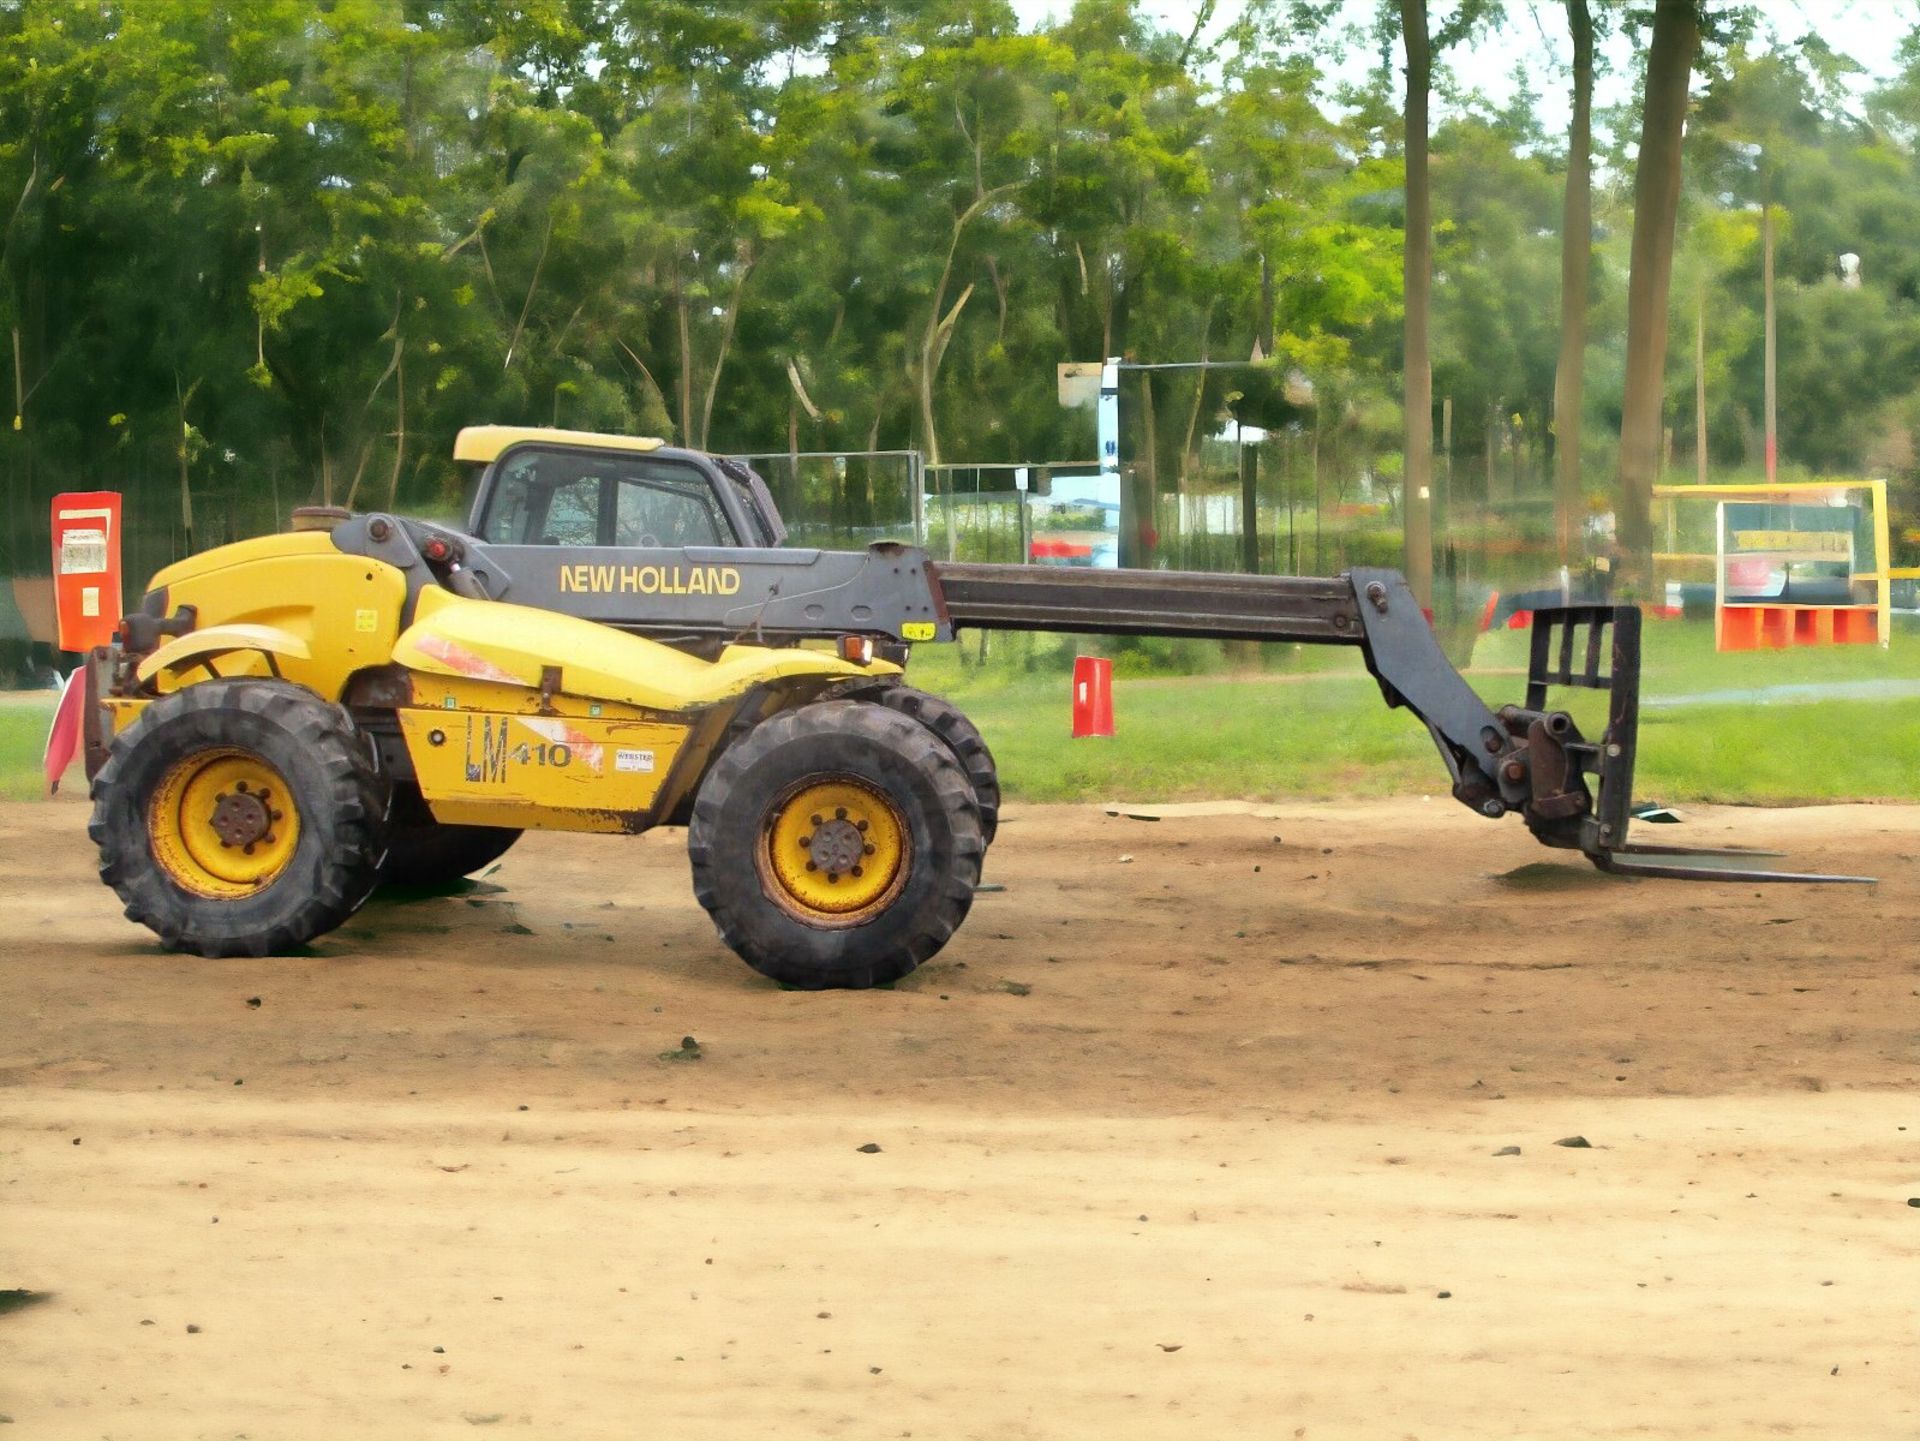 NEW HOLLAND LM410 TELEHANDLER - POWER, PRECISION, AND PERFORMANCE - Image 5 of 10